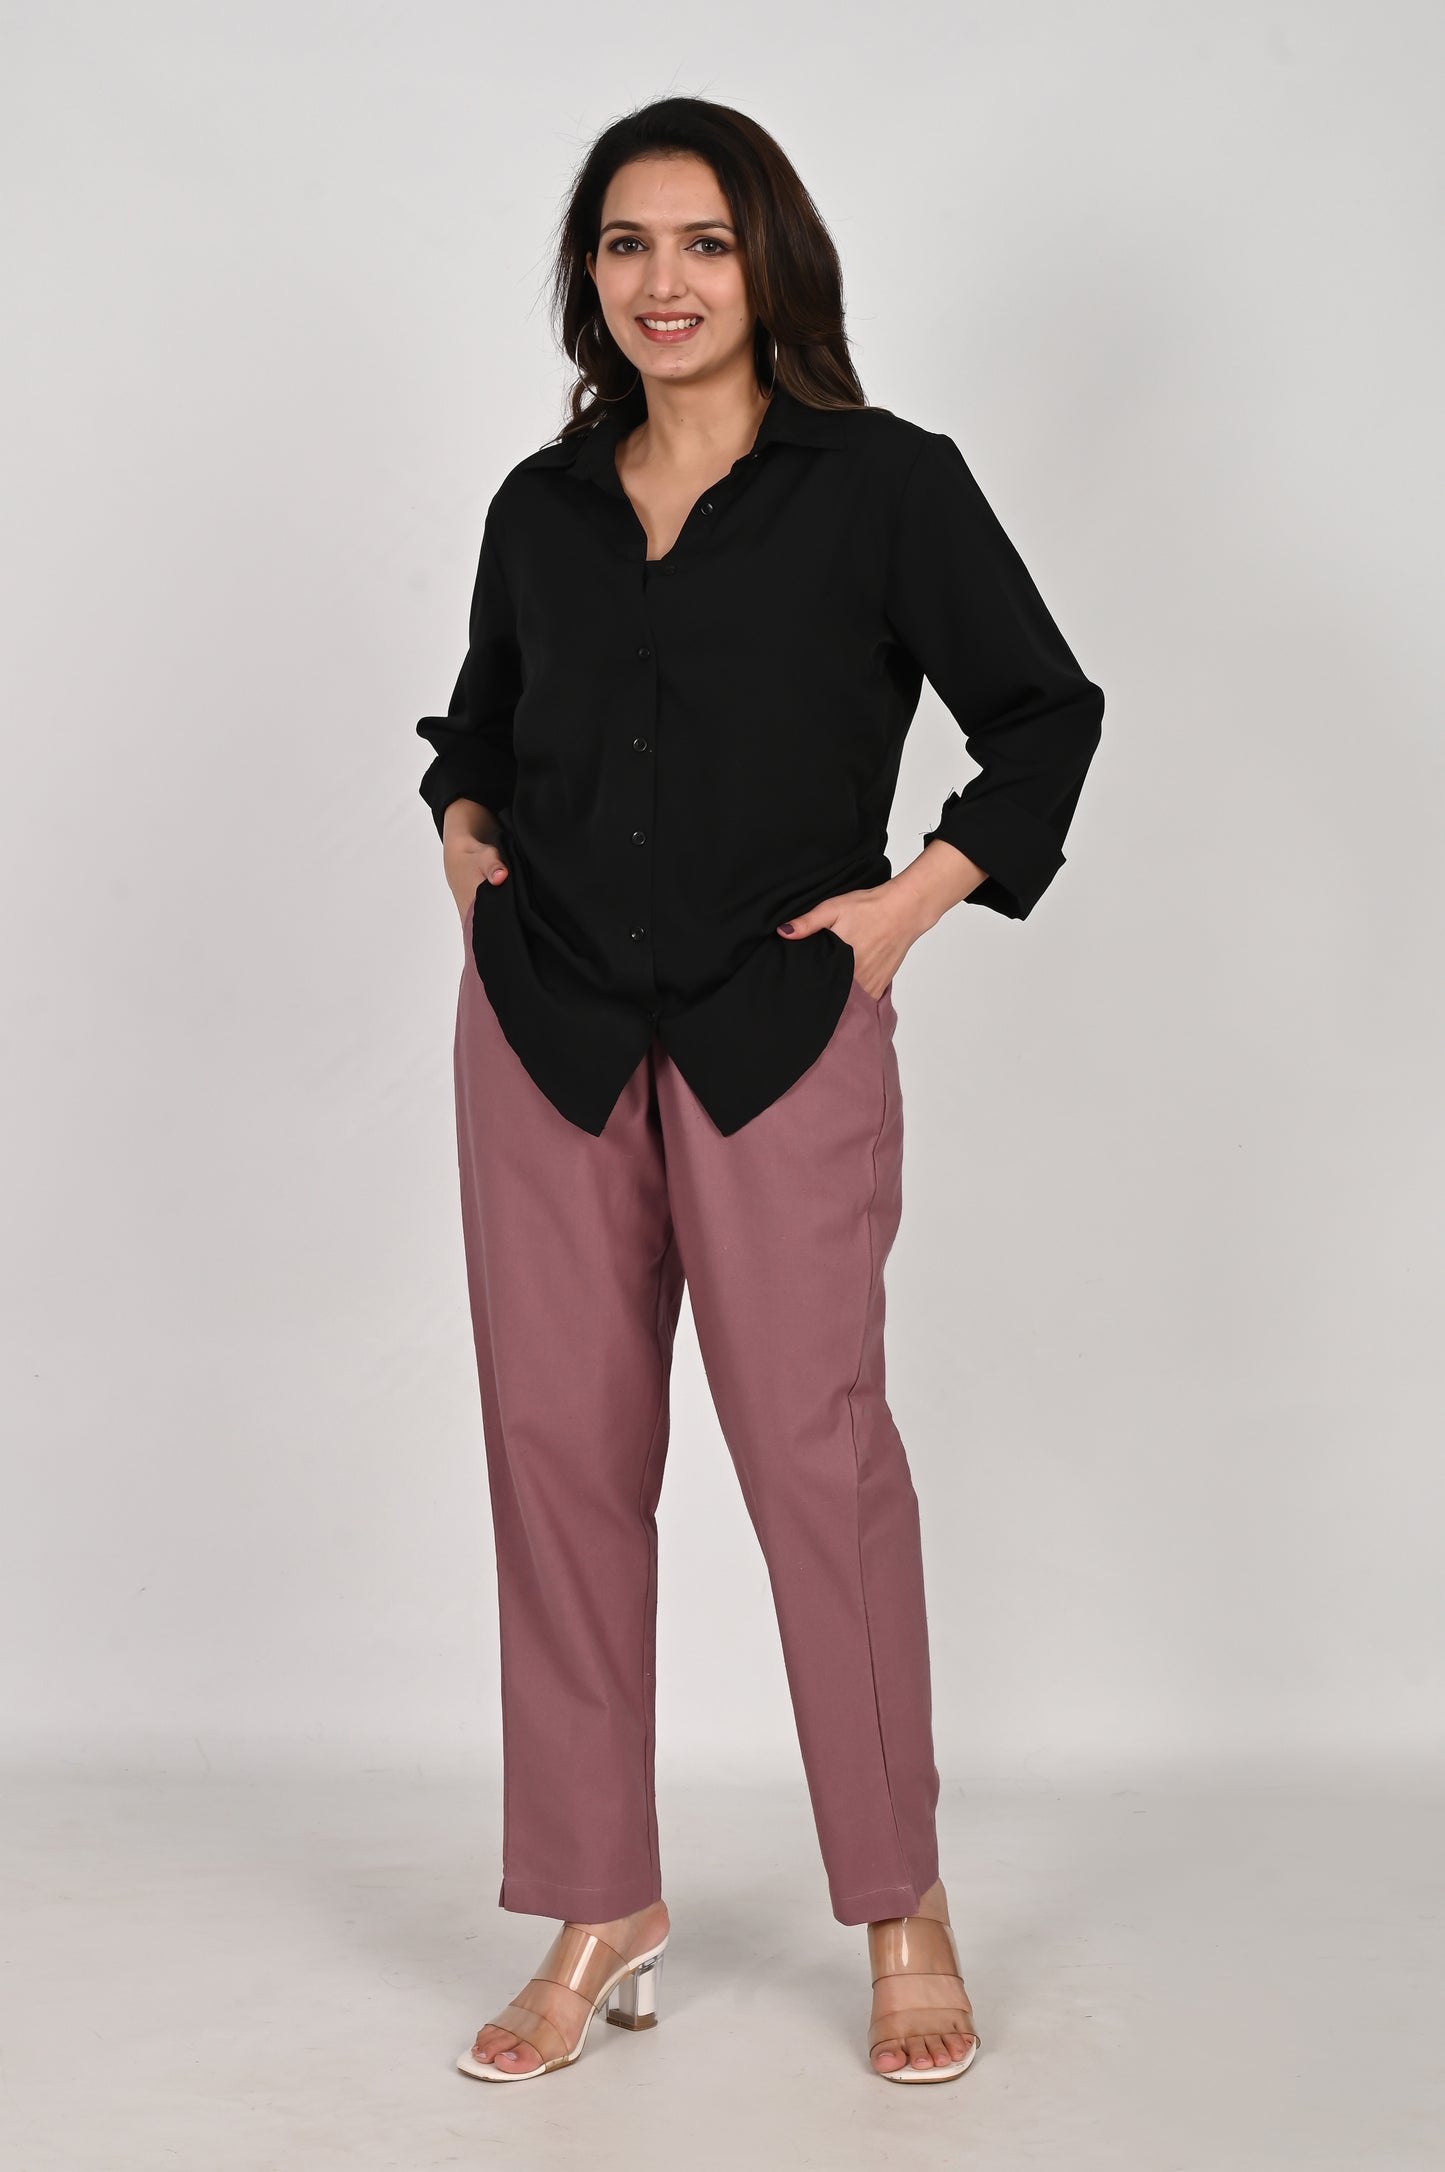 Rose Taupe Everyday Cotton Pant